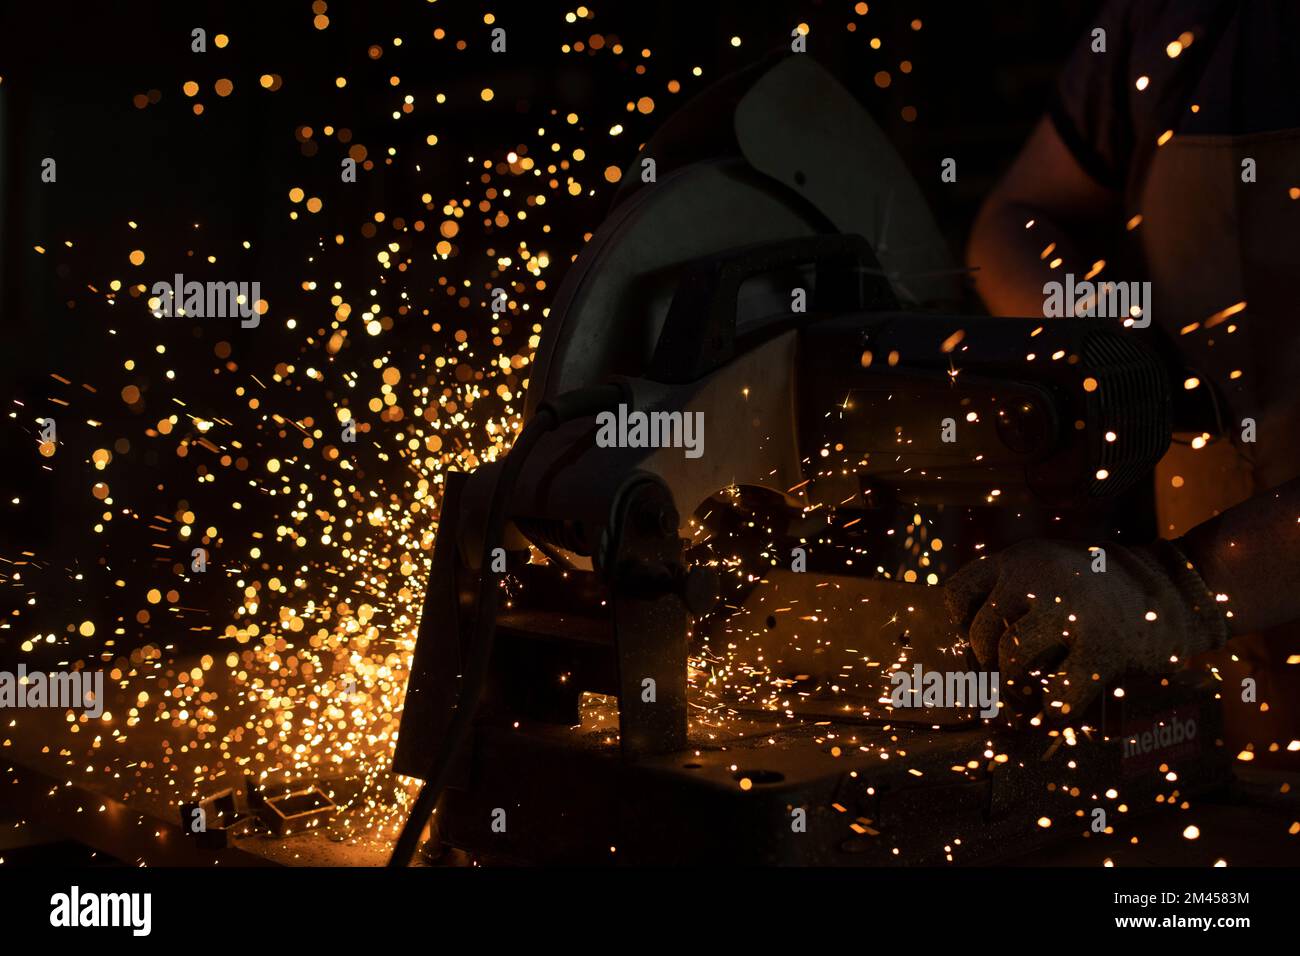 Sparks from welding. Metal cutting. Production details. Industrial background. Stock Photo